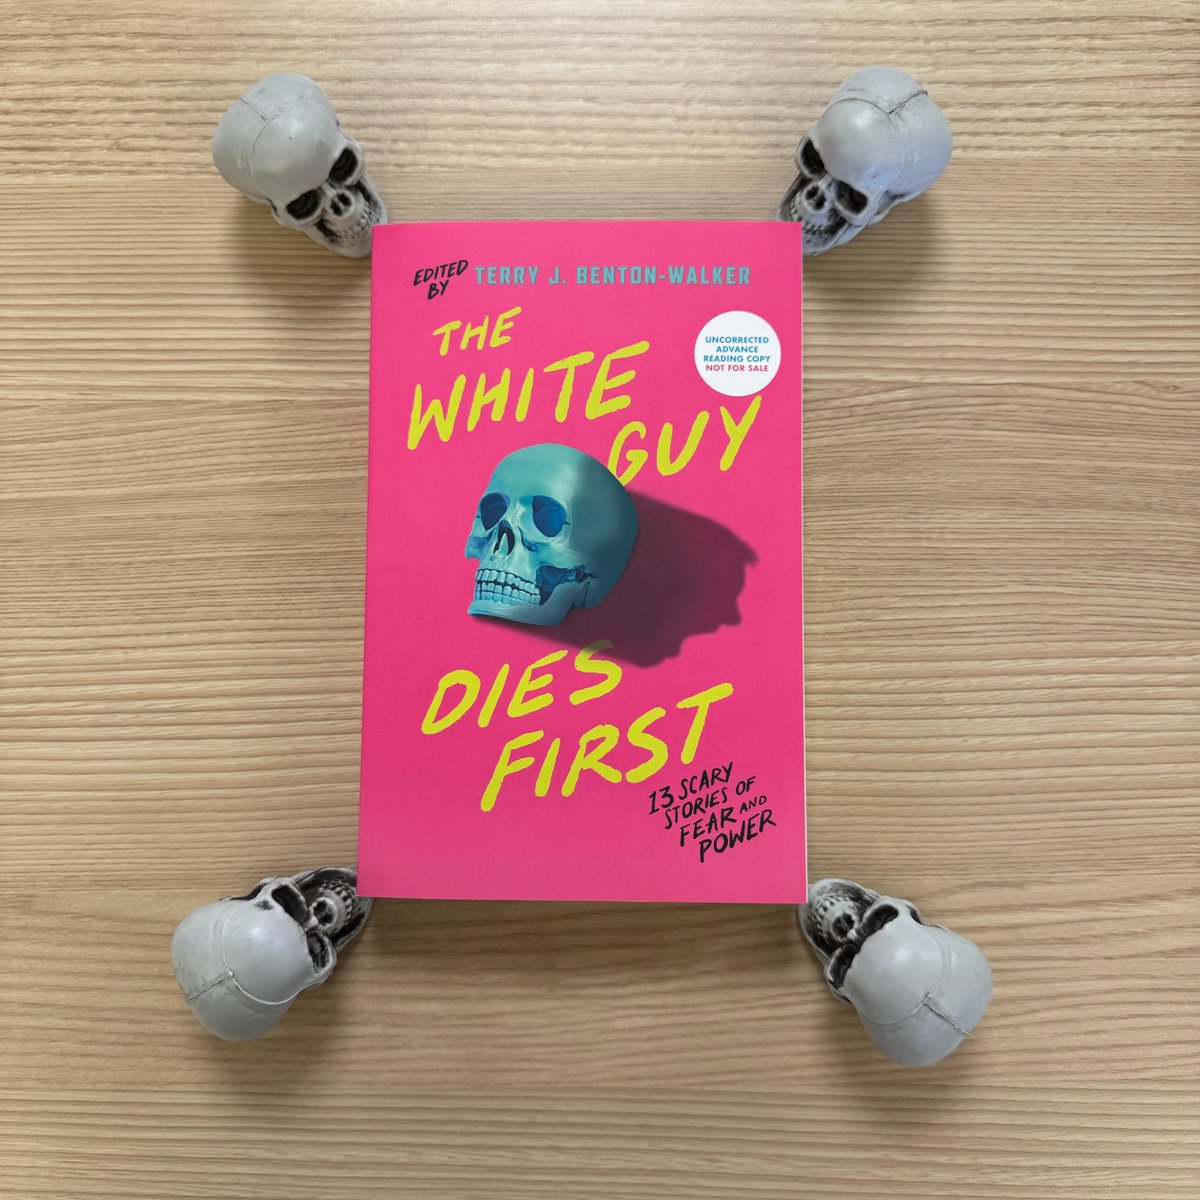 'A delightfully creepy collection....A memorable offering of imaginative frights that’s not for the faint of heart or those with weak stomachs.' - @KirkusReviews on The White Guy Dies First, edited by @tjbentonwalker💀🔪 torpublishinggroup.com/the-white-guy-…